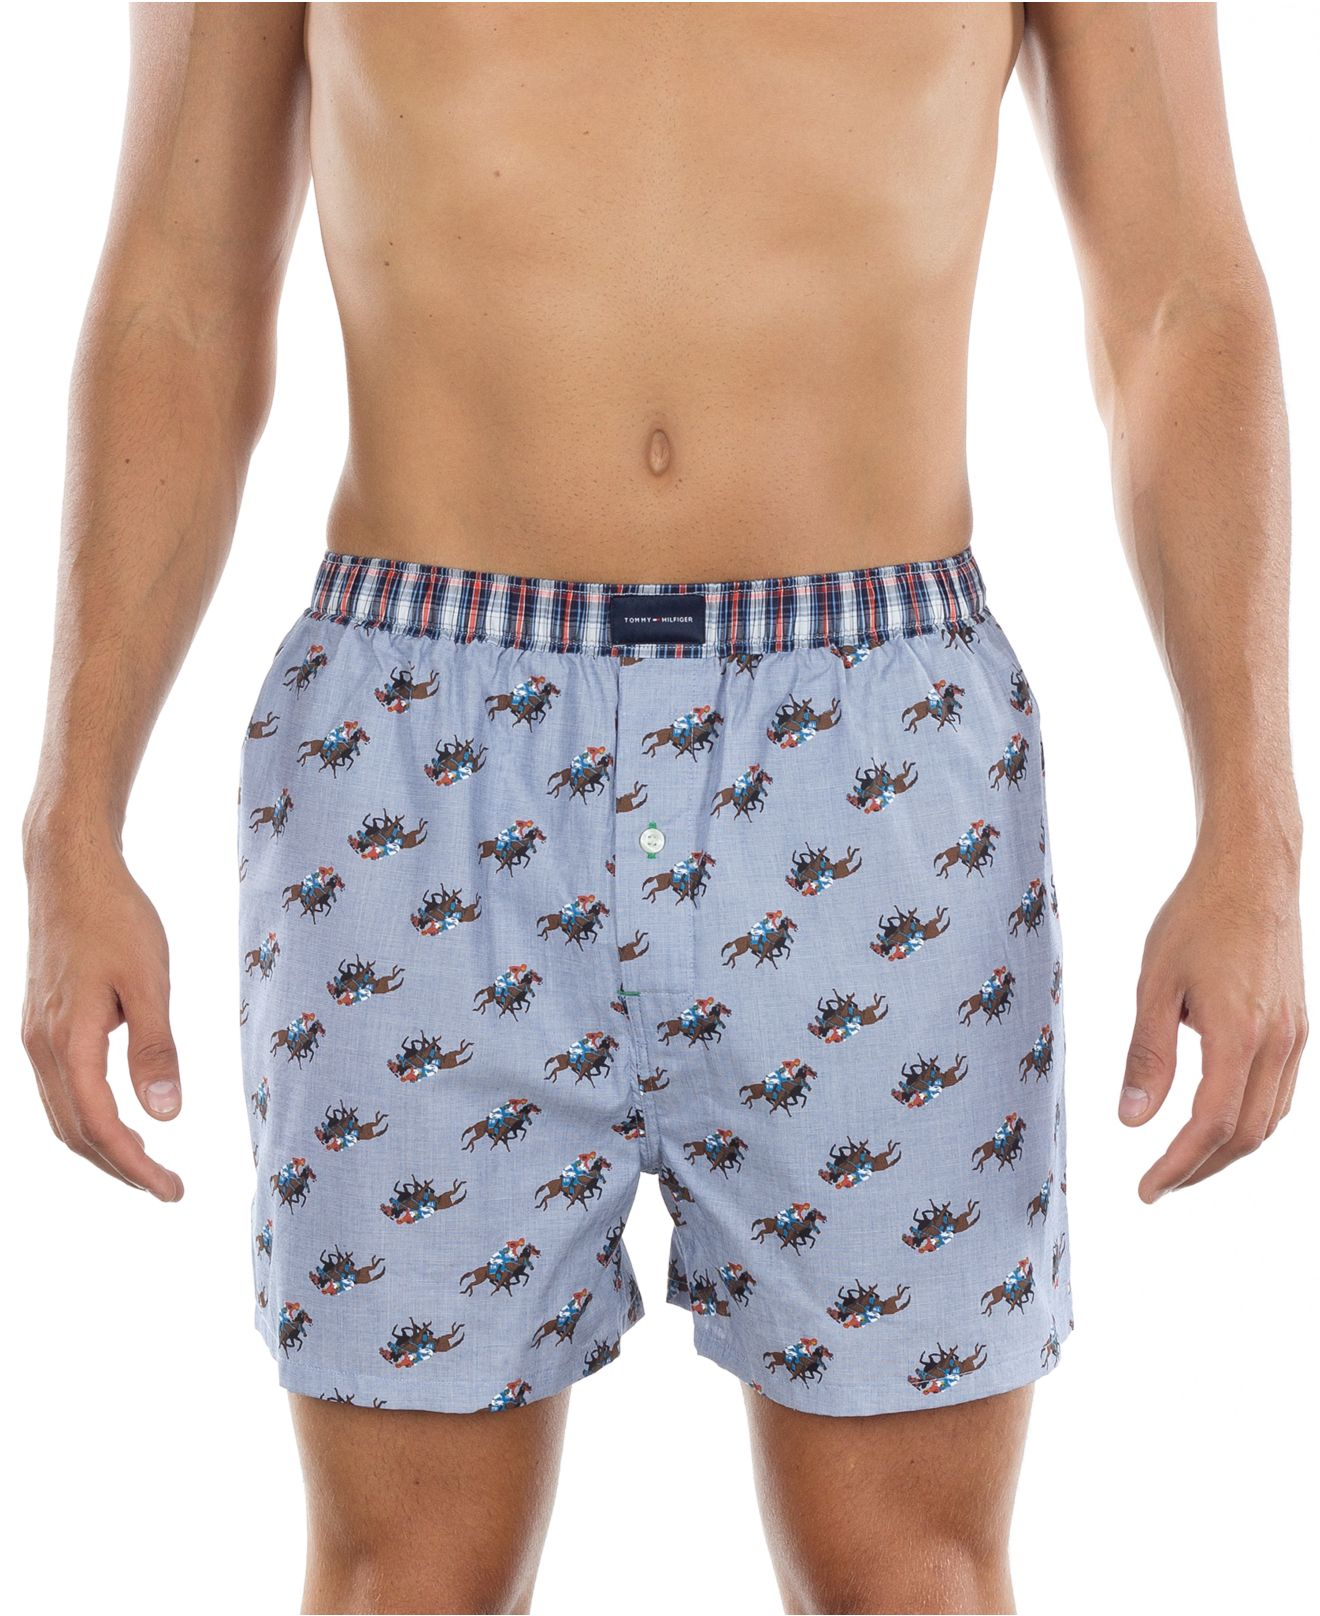 Lyst - Tommy Hilfiger Mens Horse Racing Print Woven Boxers in Blue for Men